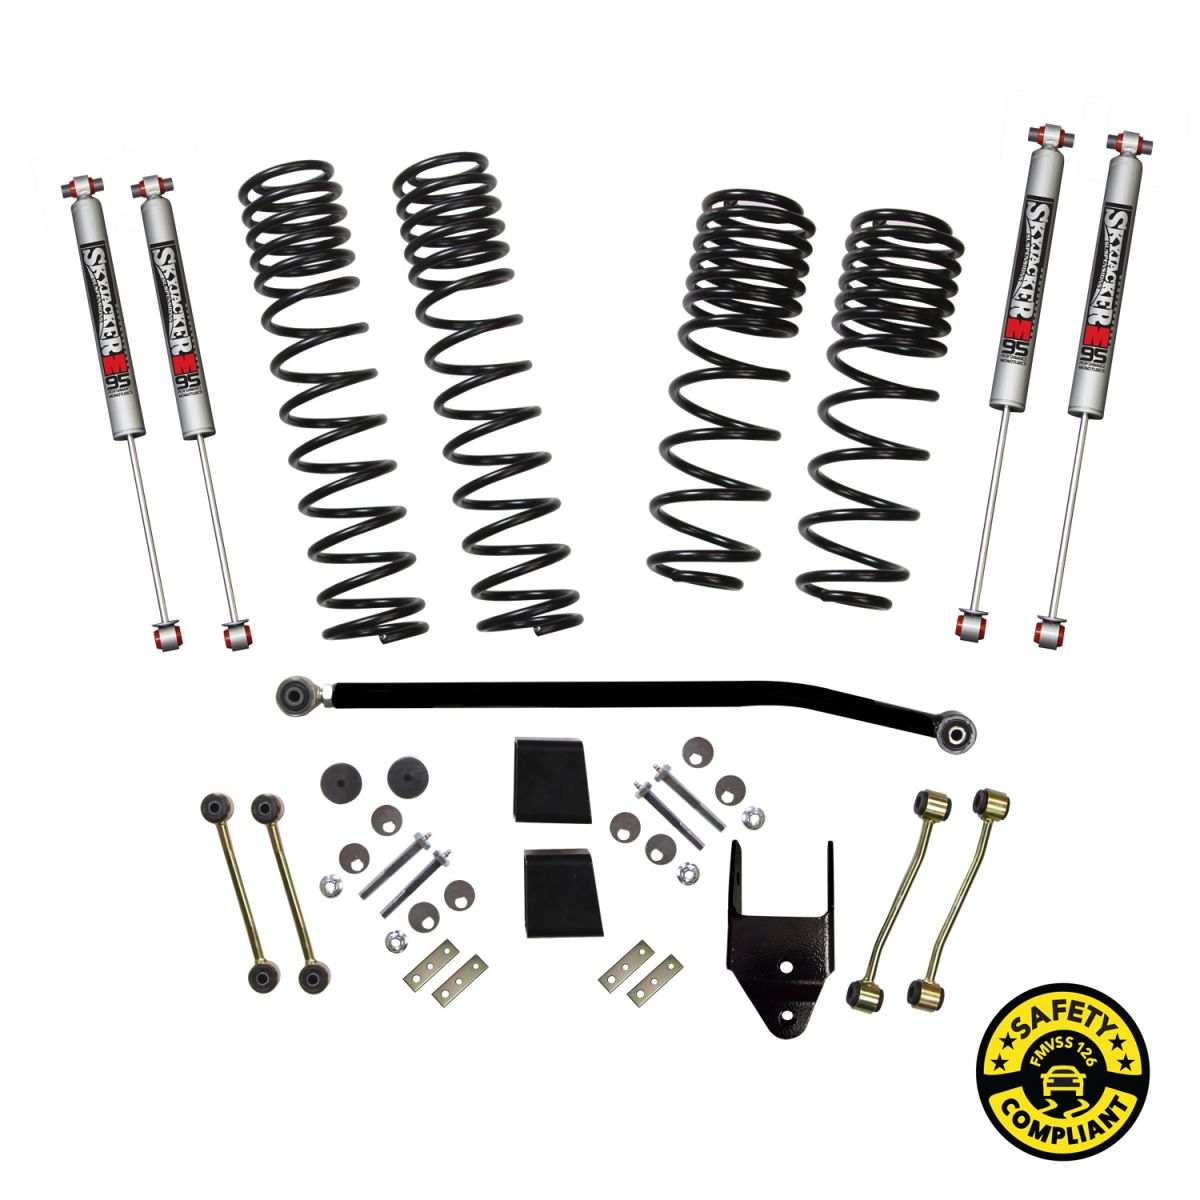 Skyjacker Suspension - Skyjacker Dual Rate Long Travel 3.5-4" Lift Kit System with M95 Shocks For 18-20 Jeep Wrangler JL Unlimited Four Door